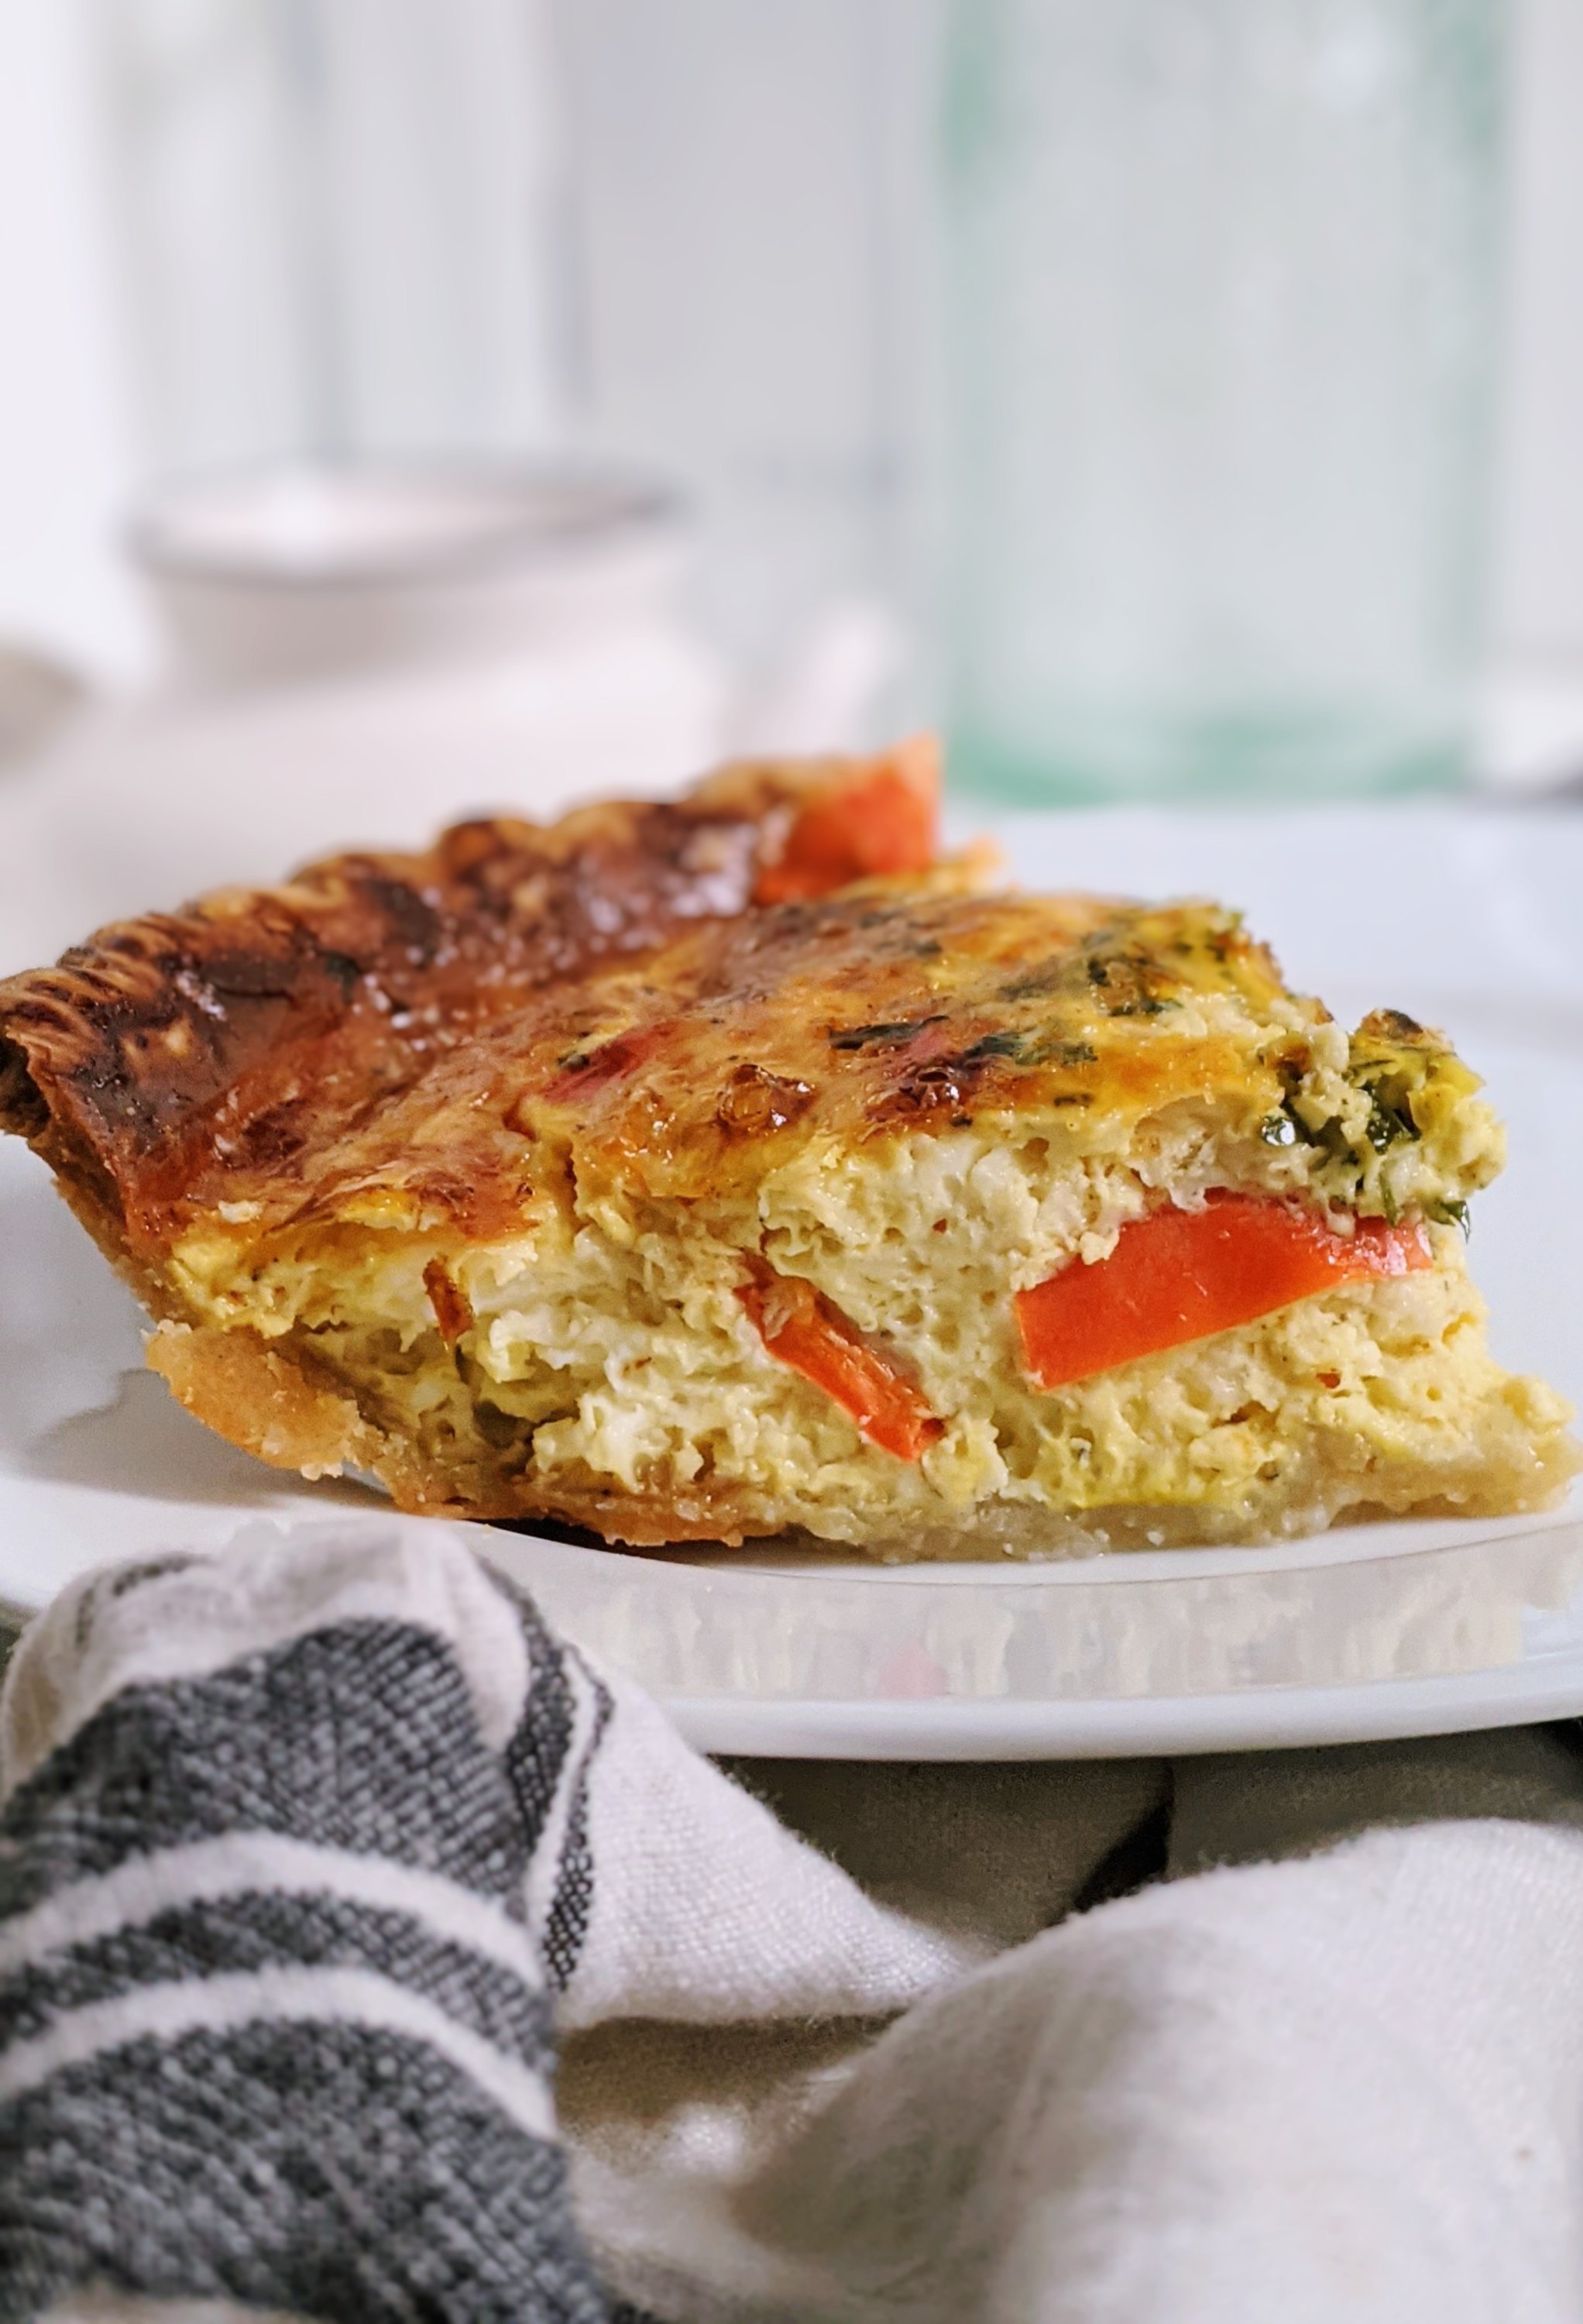 healthy vegetarian quiche meatless recipe for vegetarians healthy plant based quiche vegetarian veggies with frozoen quiche and eggs high protein make ahead breafkast or brunch options meal prep recipes for families